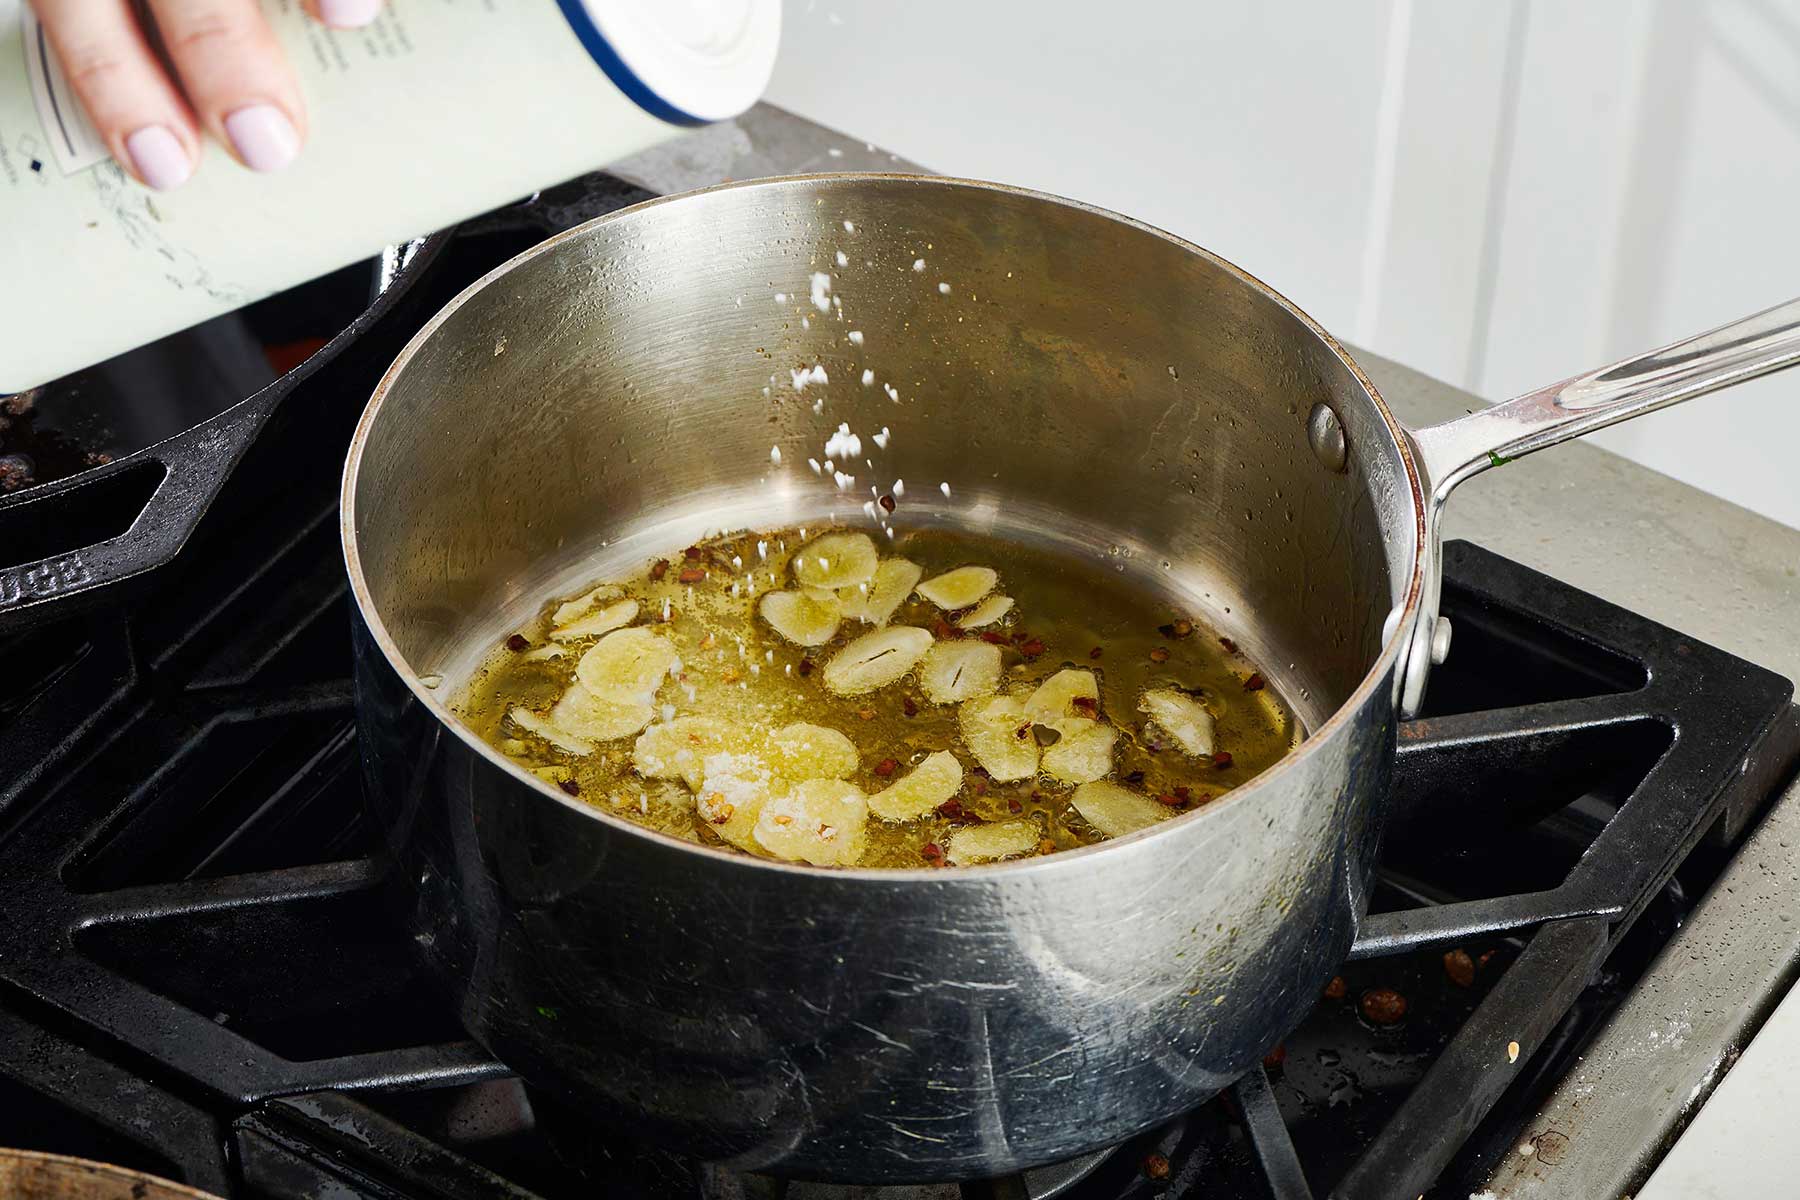 Woman salting sauteed garlic in a pot on the stove.